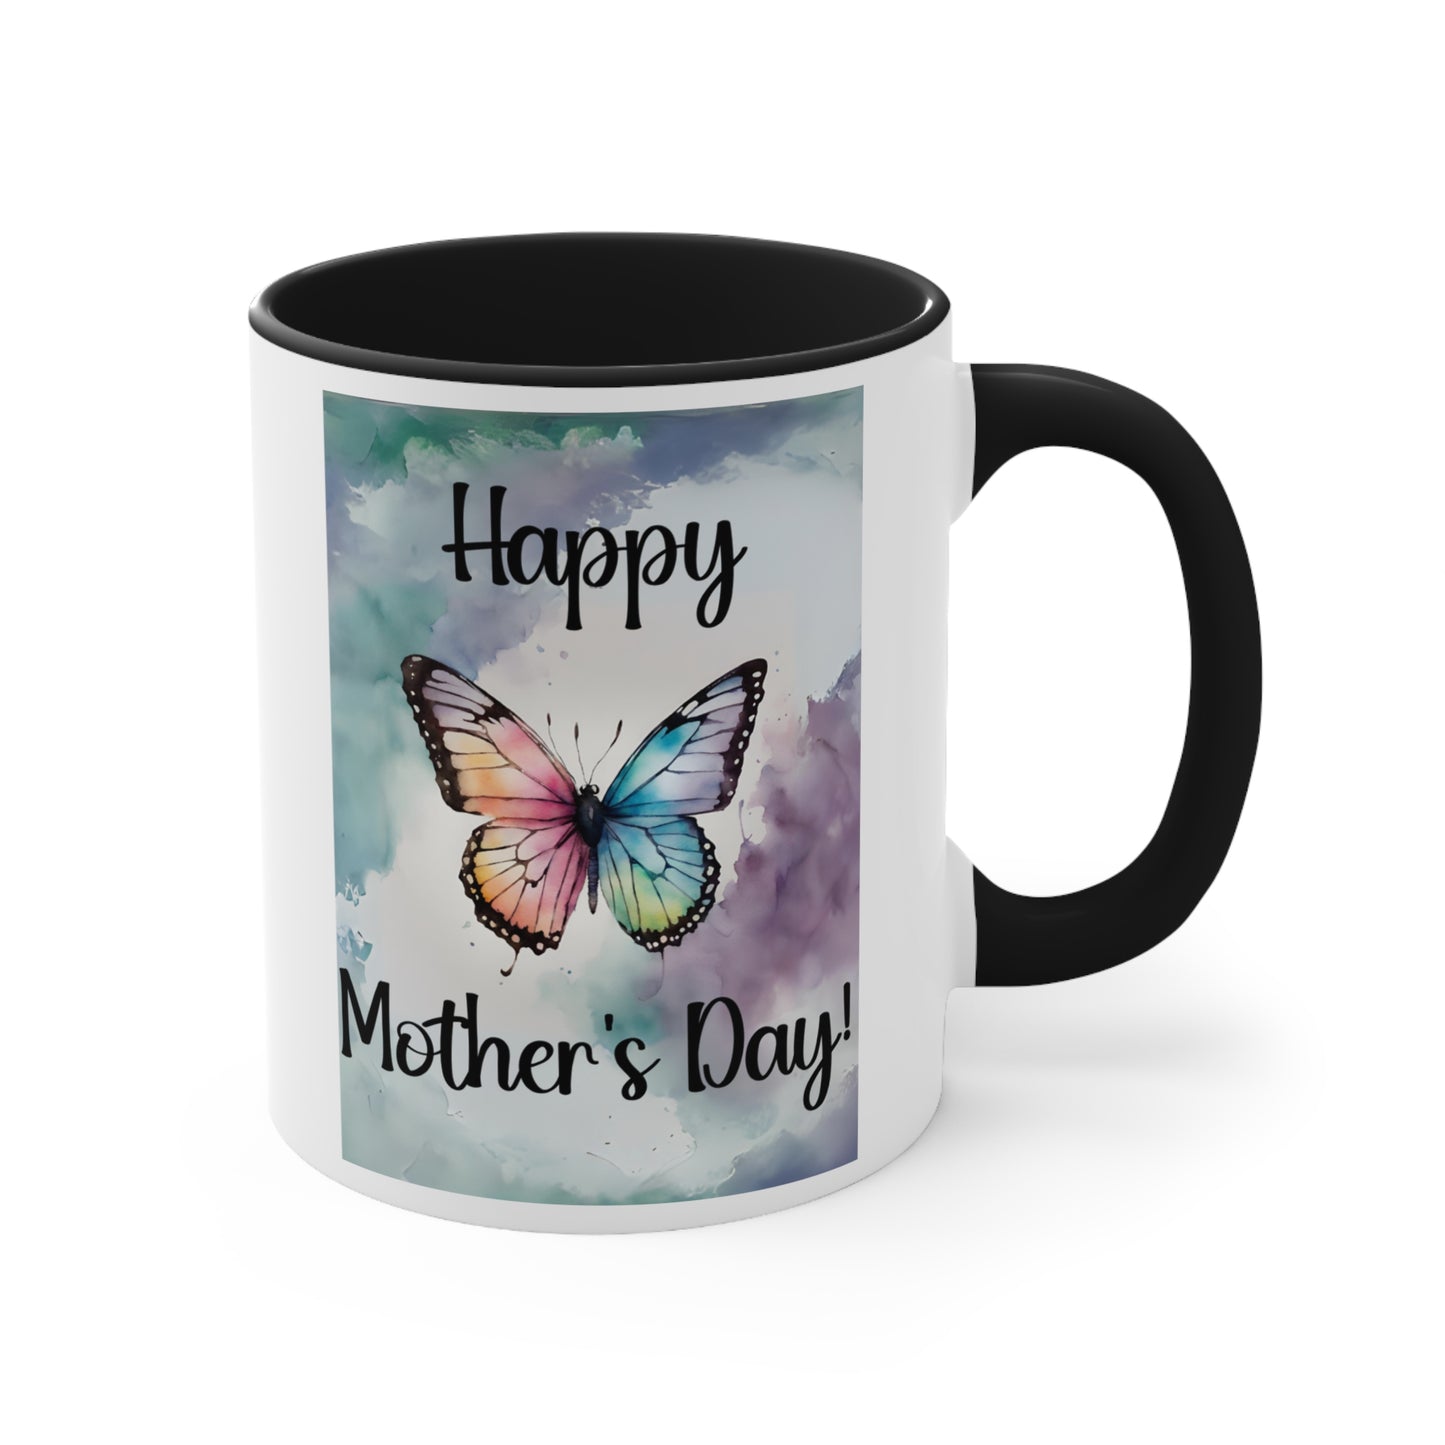 Watercolor Mother's Day Mug with Butterfly, 11oz